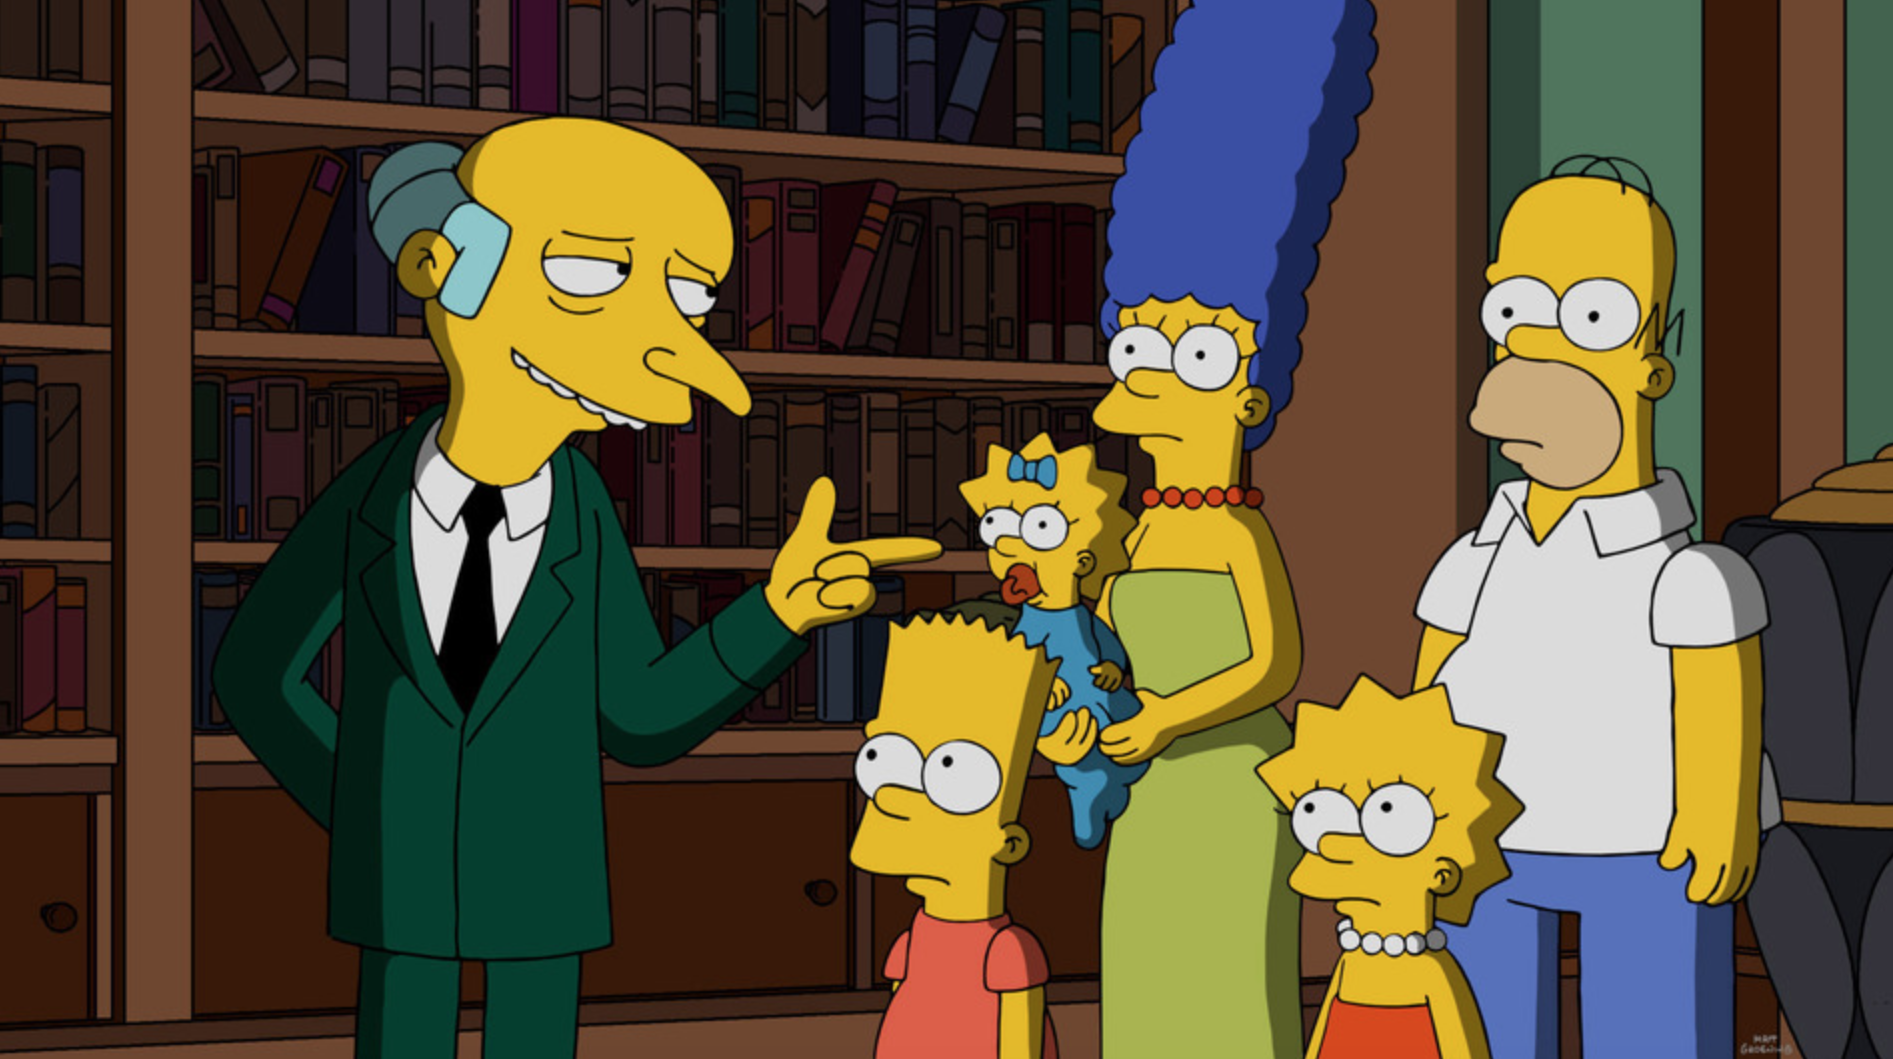 Fan of ‘The Simpsons’? Audition for These Animated Projects